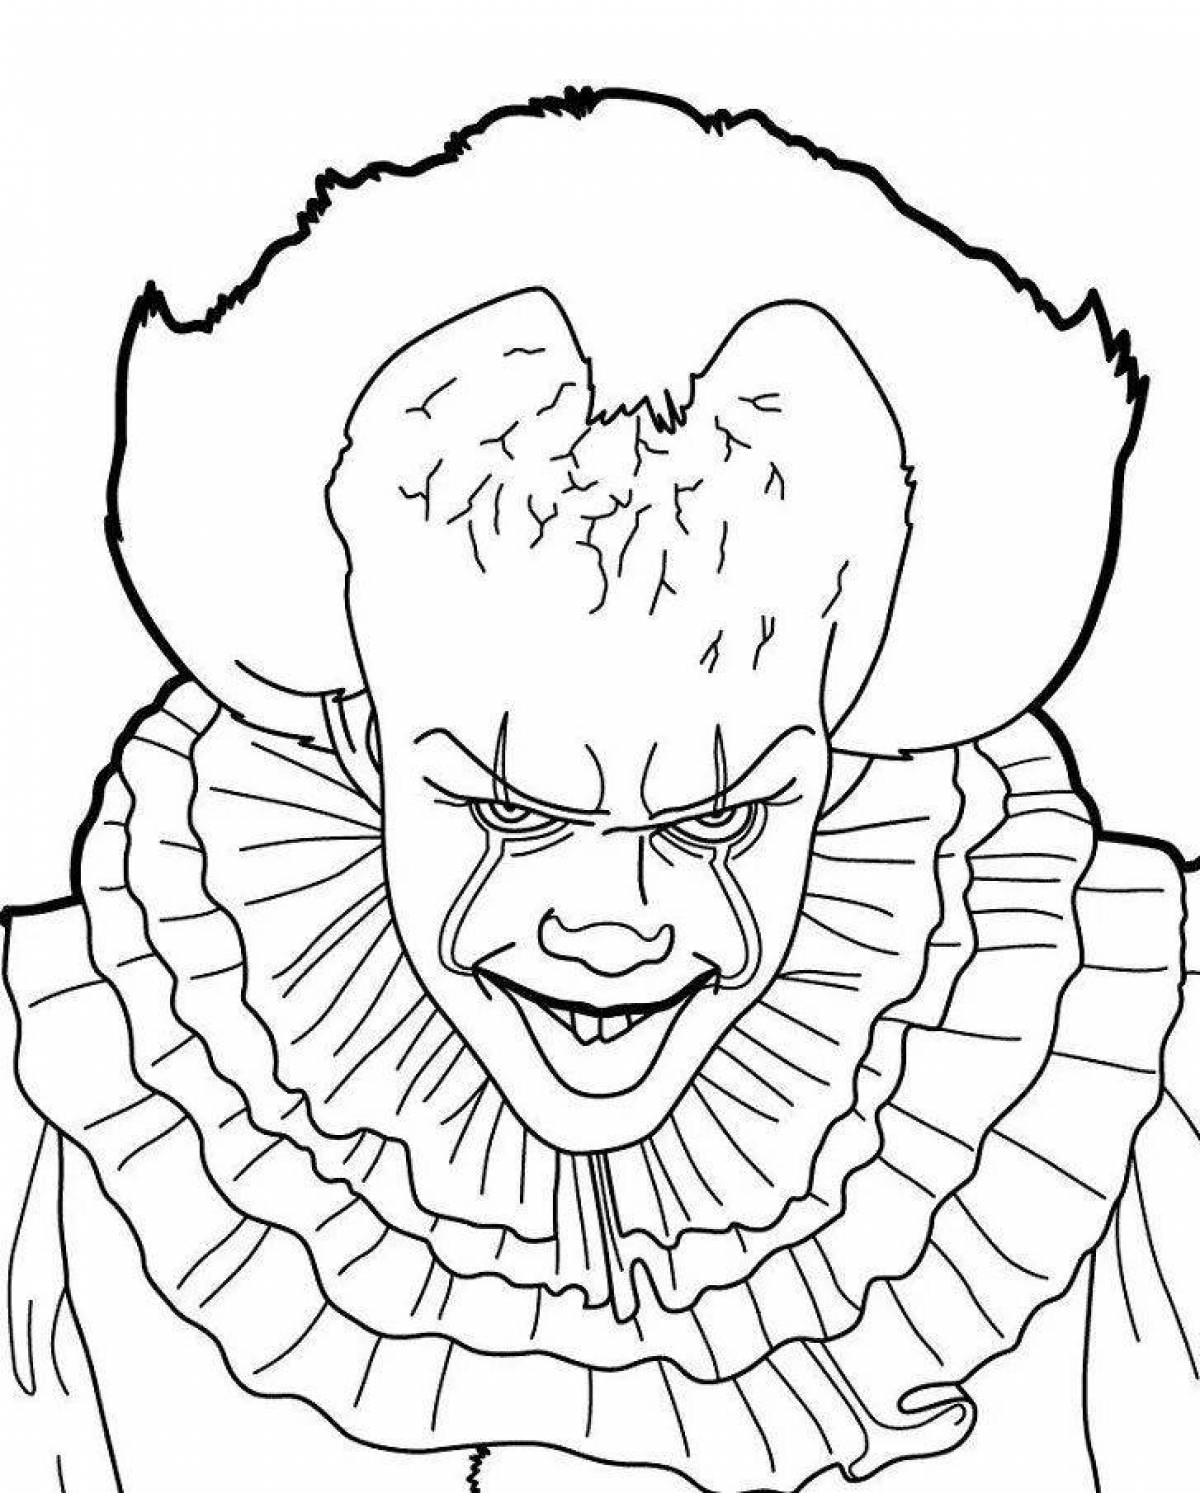 Shocking pennywise coloring book